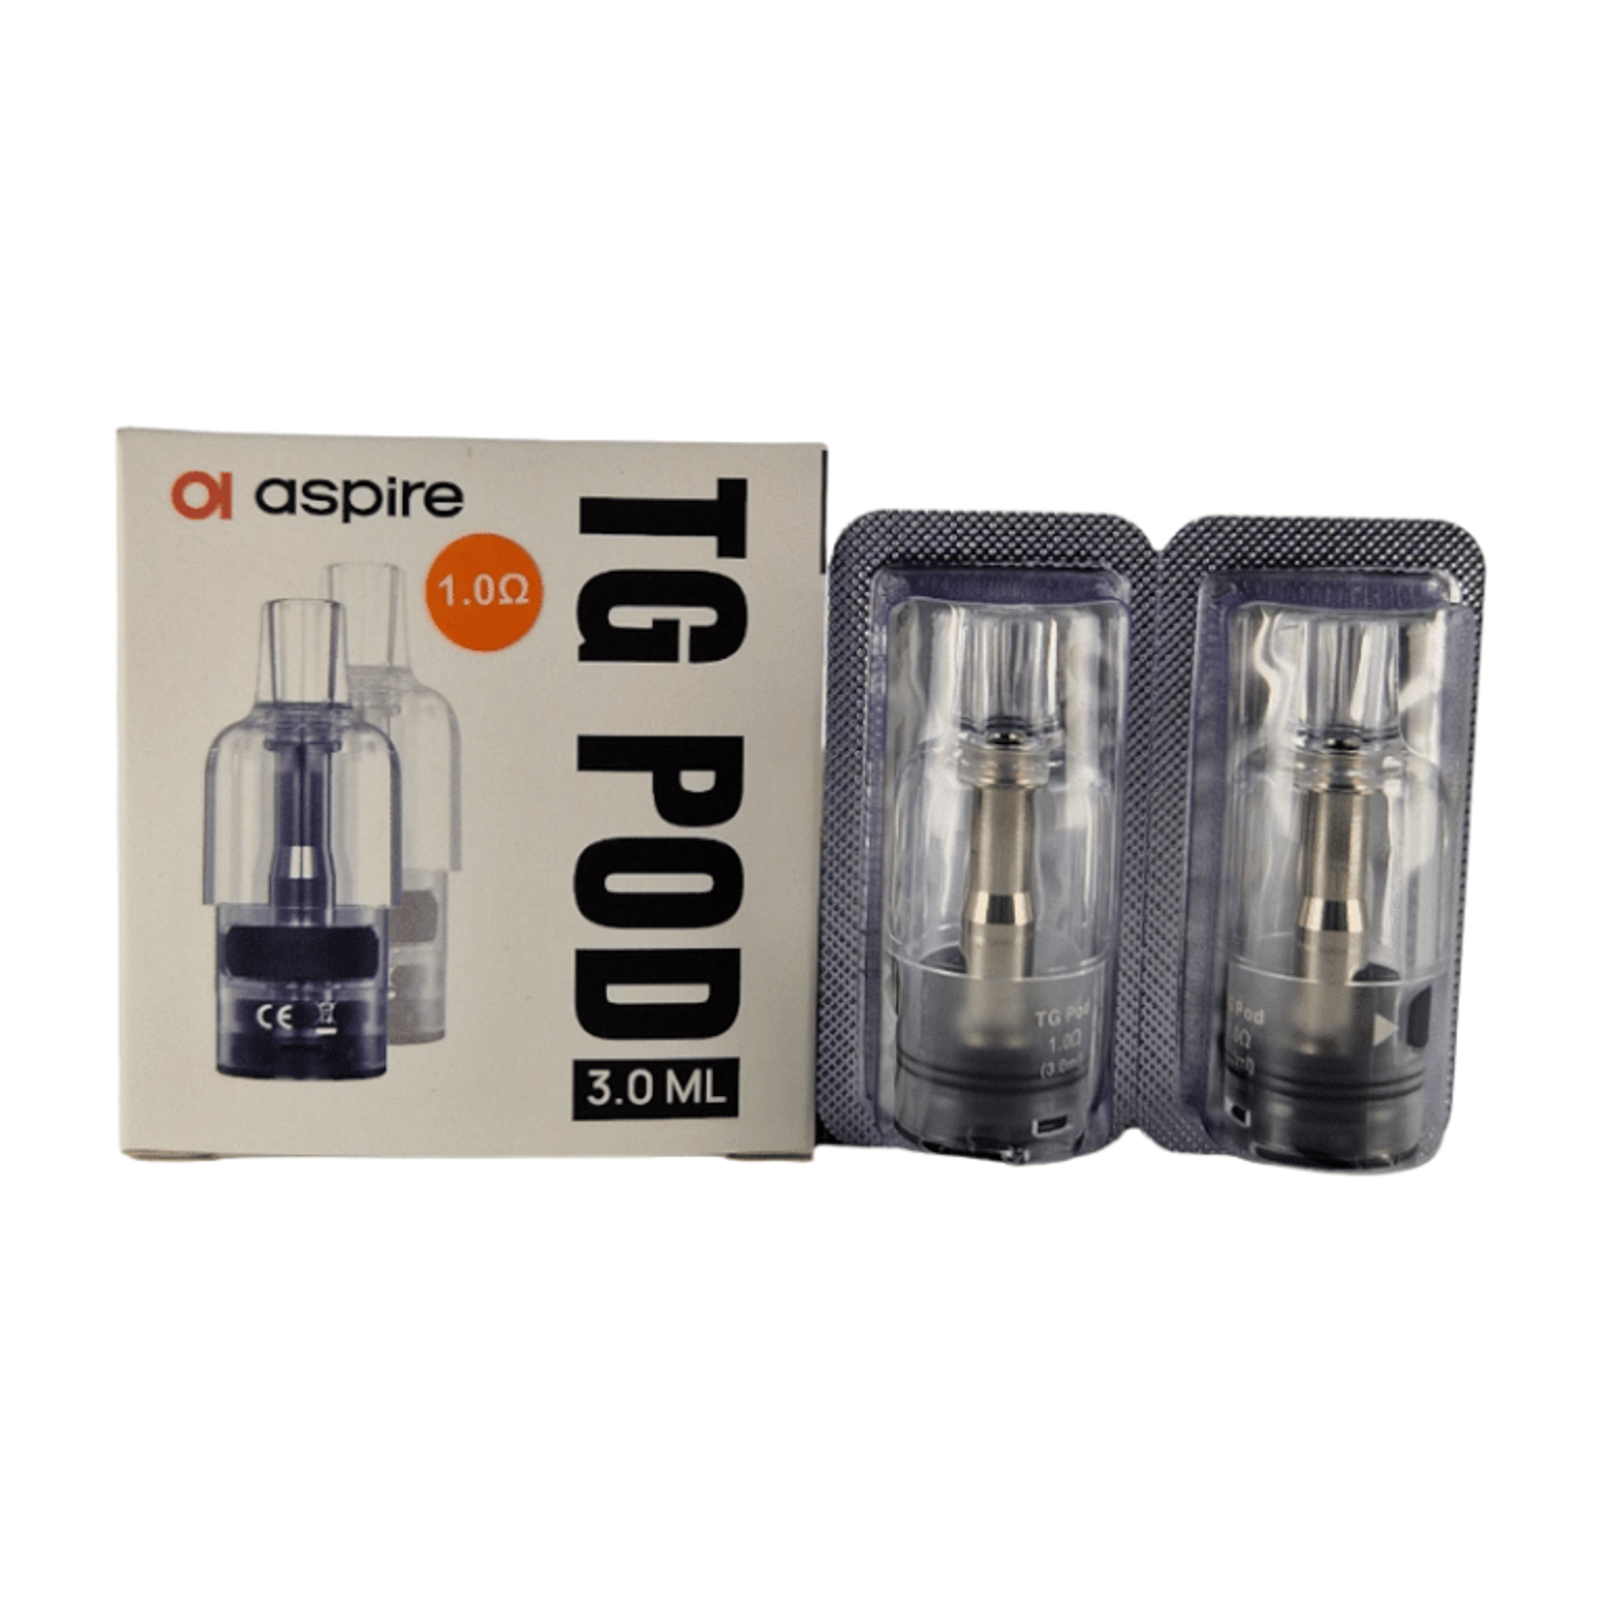 2-PCS-ASPIRE-3ML-CYBER-G-COIL$-variant-1-.png